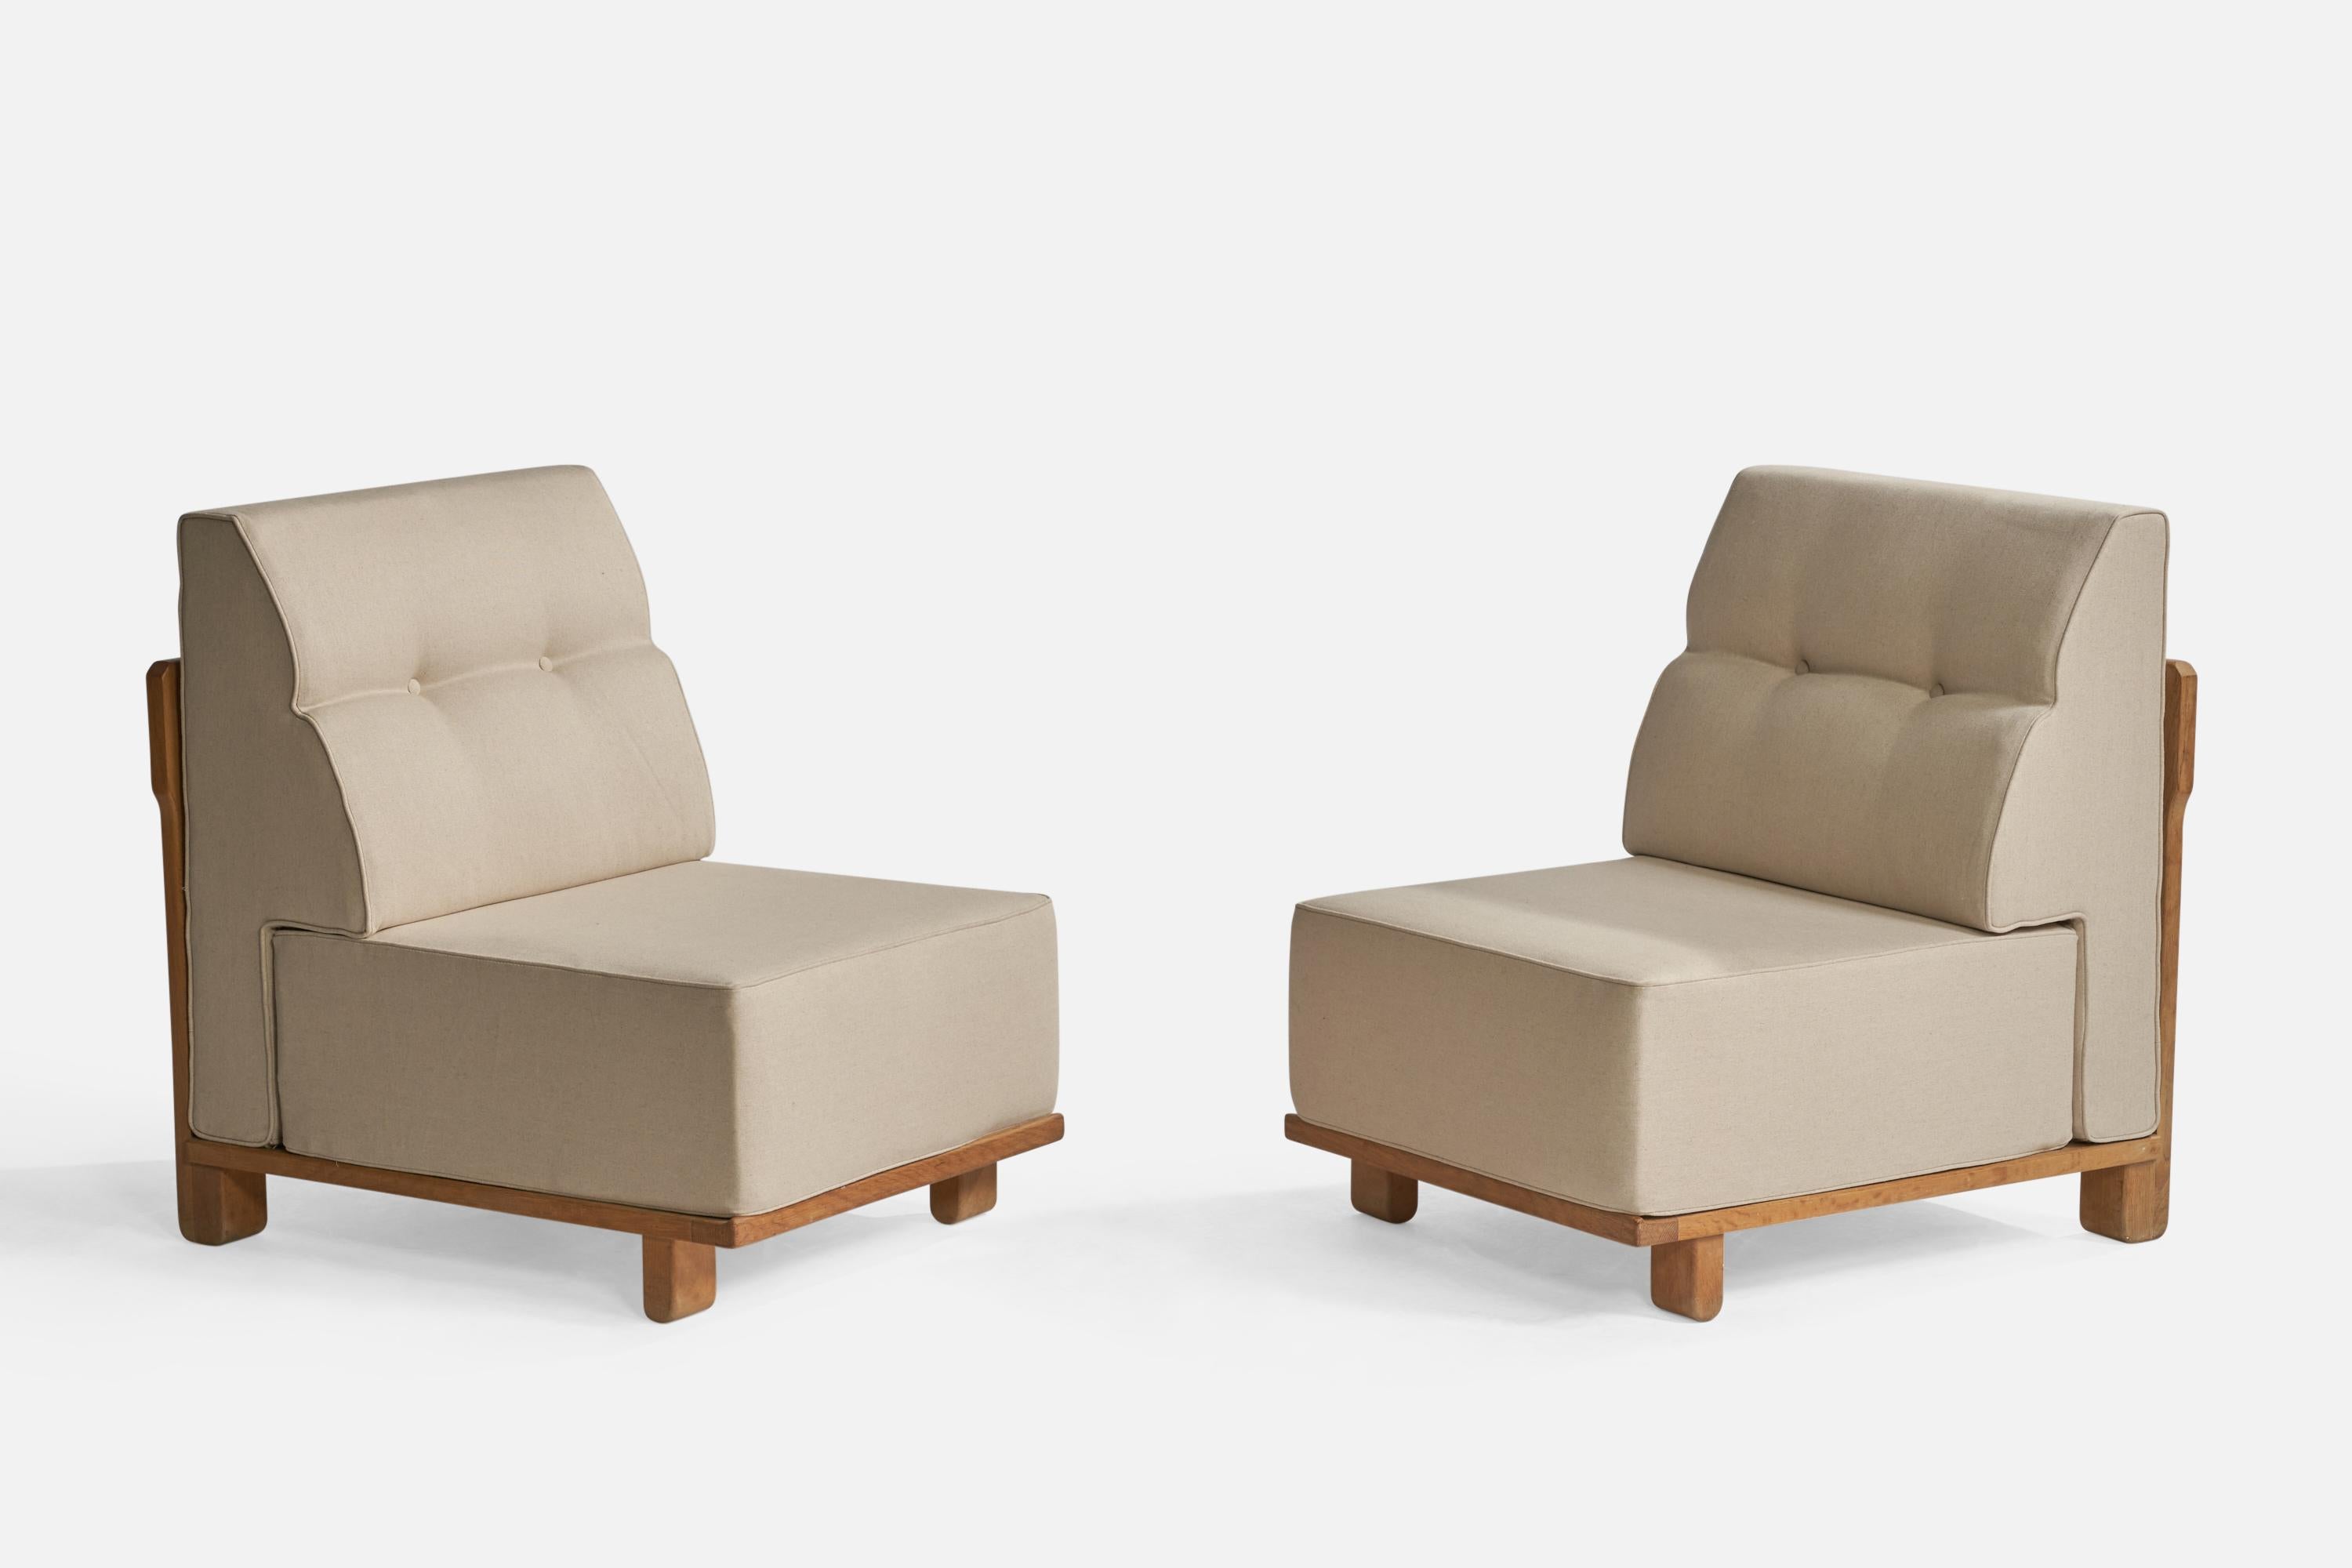 A pair of beige fabric and oak lounge or slipper chairs designed by Robert Guillerme and Jacques Chambron, France, 1950s.

Seat height: 15.5”